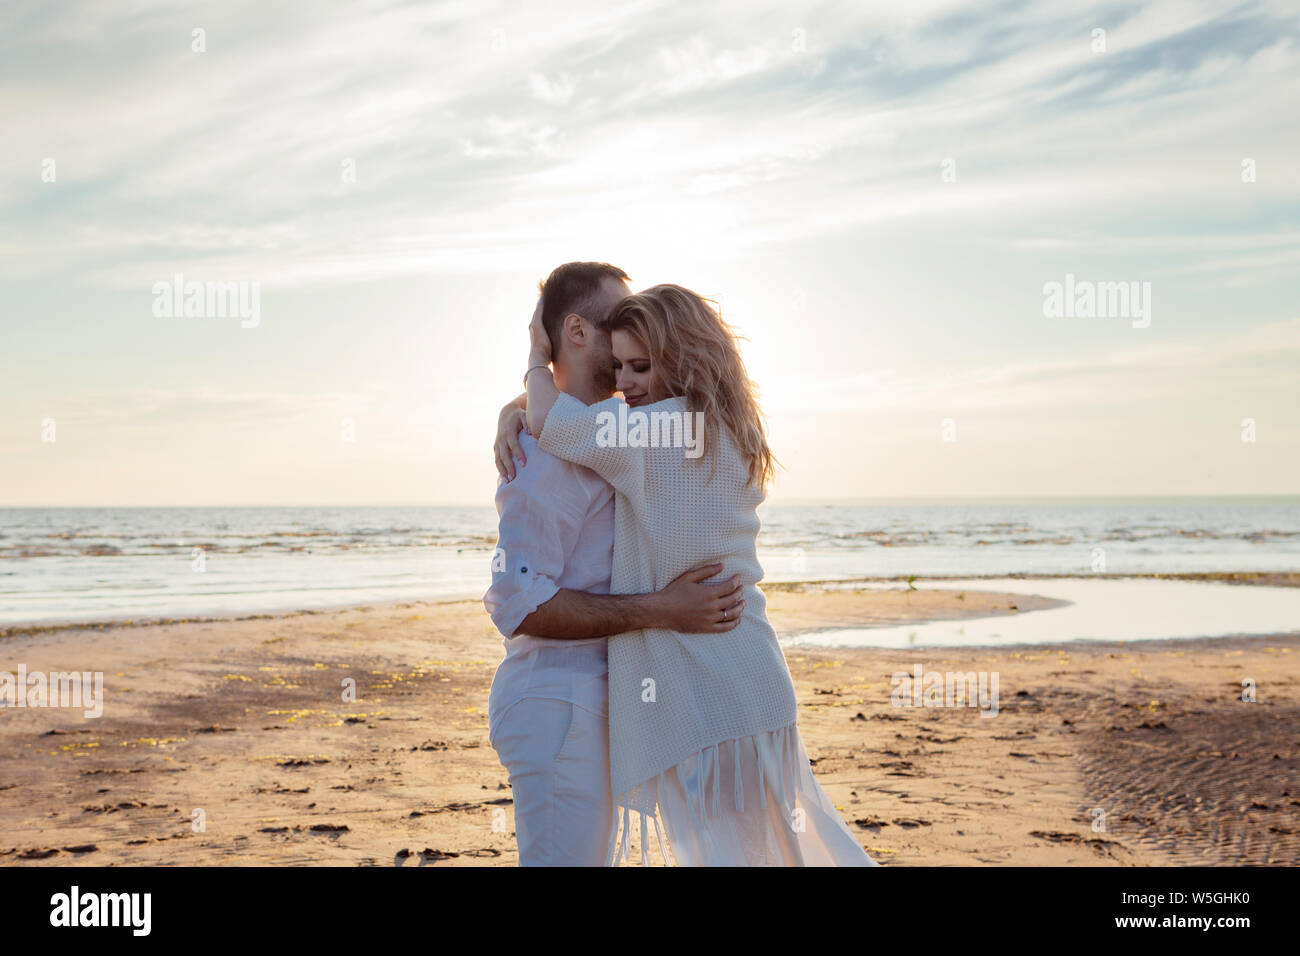 Love, sunset, romance. A young couple in long white soft clothes walking, resting, hugging against the backdrop of a calm sea landscape, sunset. Stock Photo